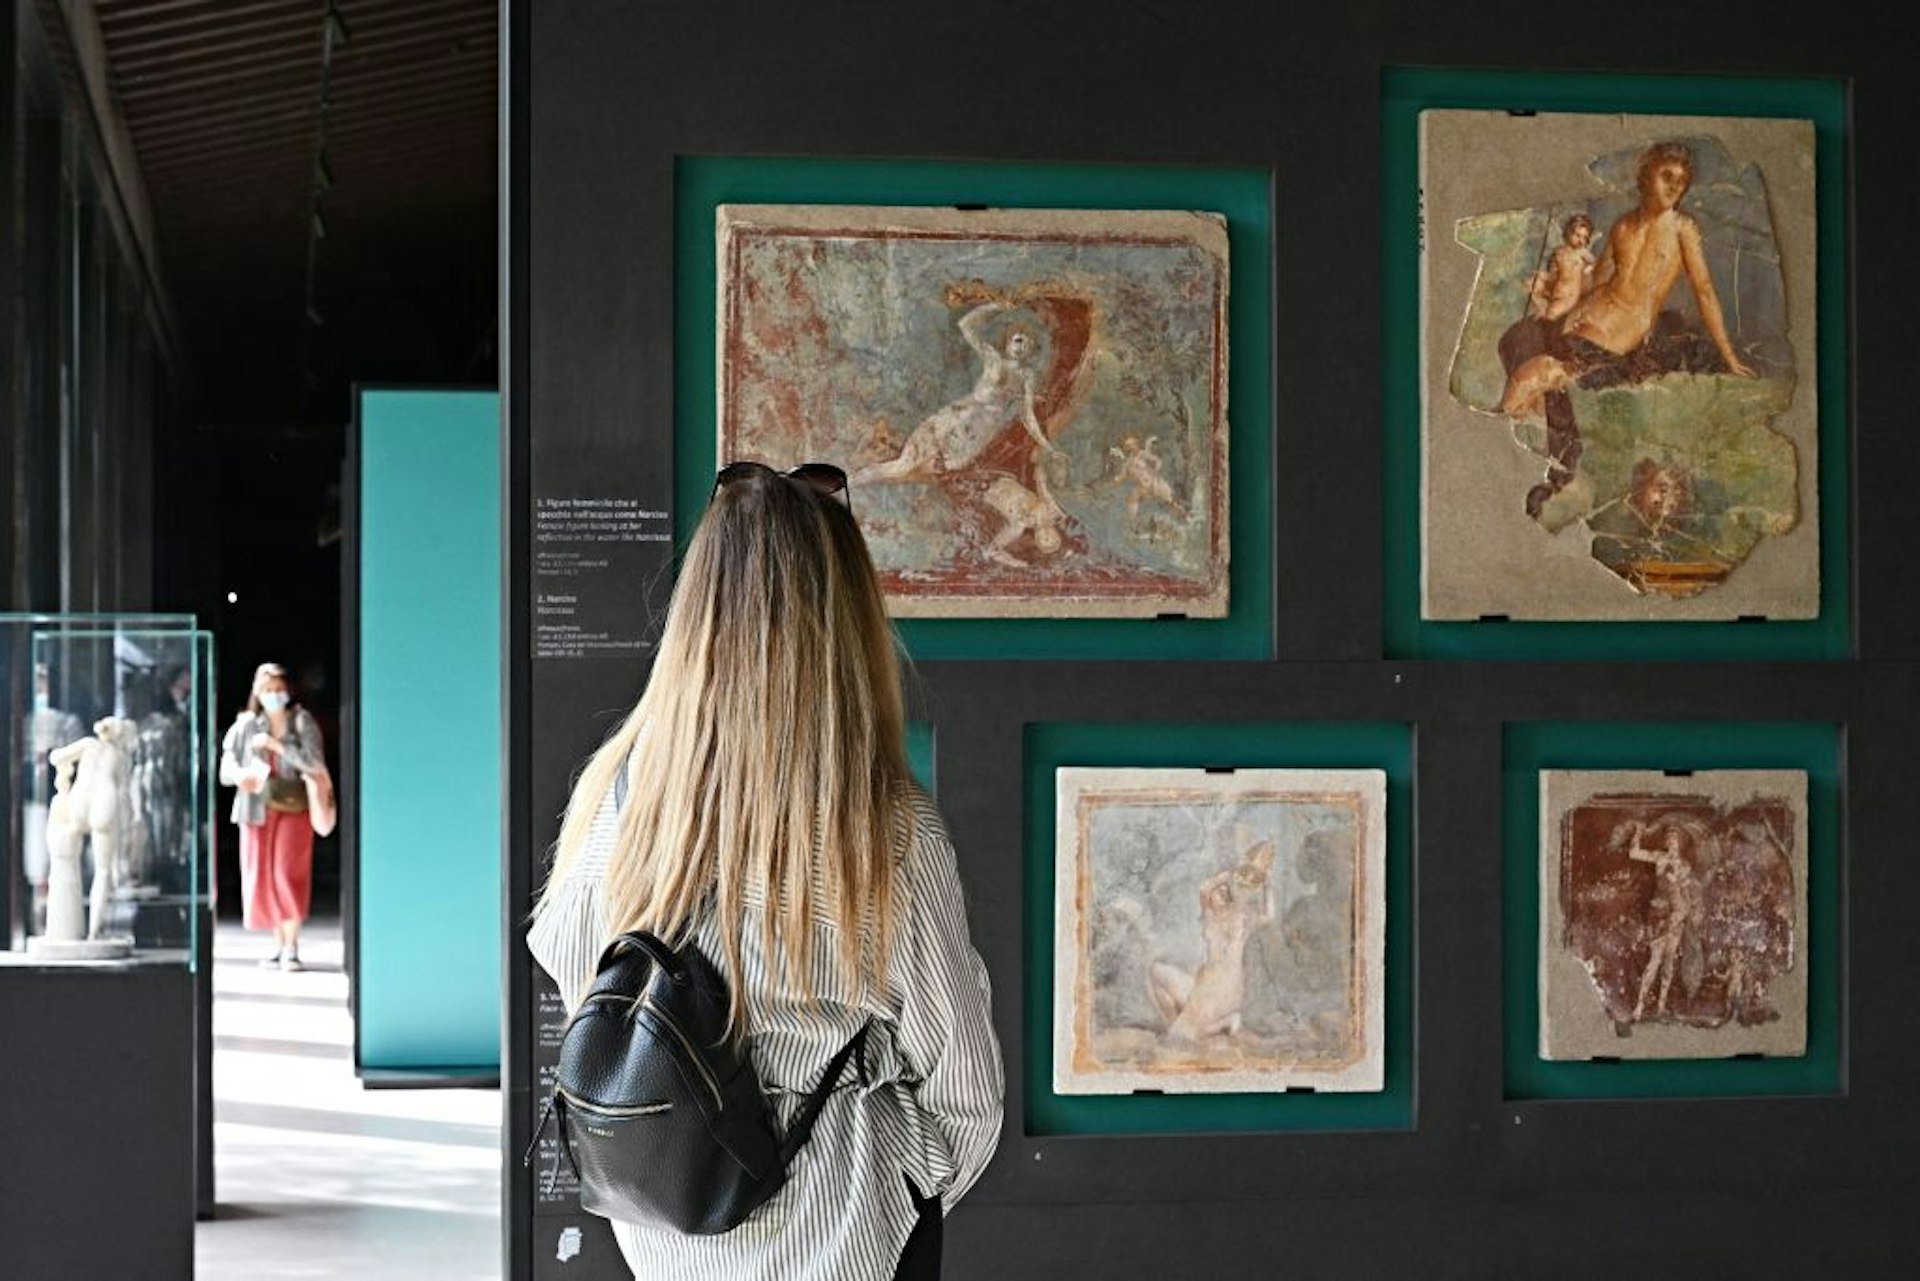 A blonde woman looks at old erotic frescoes displayed against a green wall which form part of a new exhibition in Pompeii called "Art and sensuality in the houses of Pompeii"